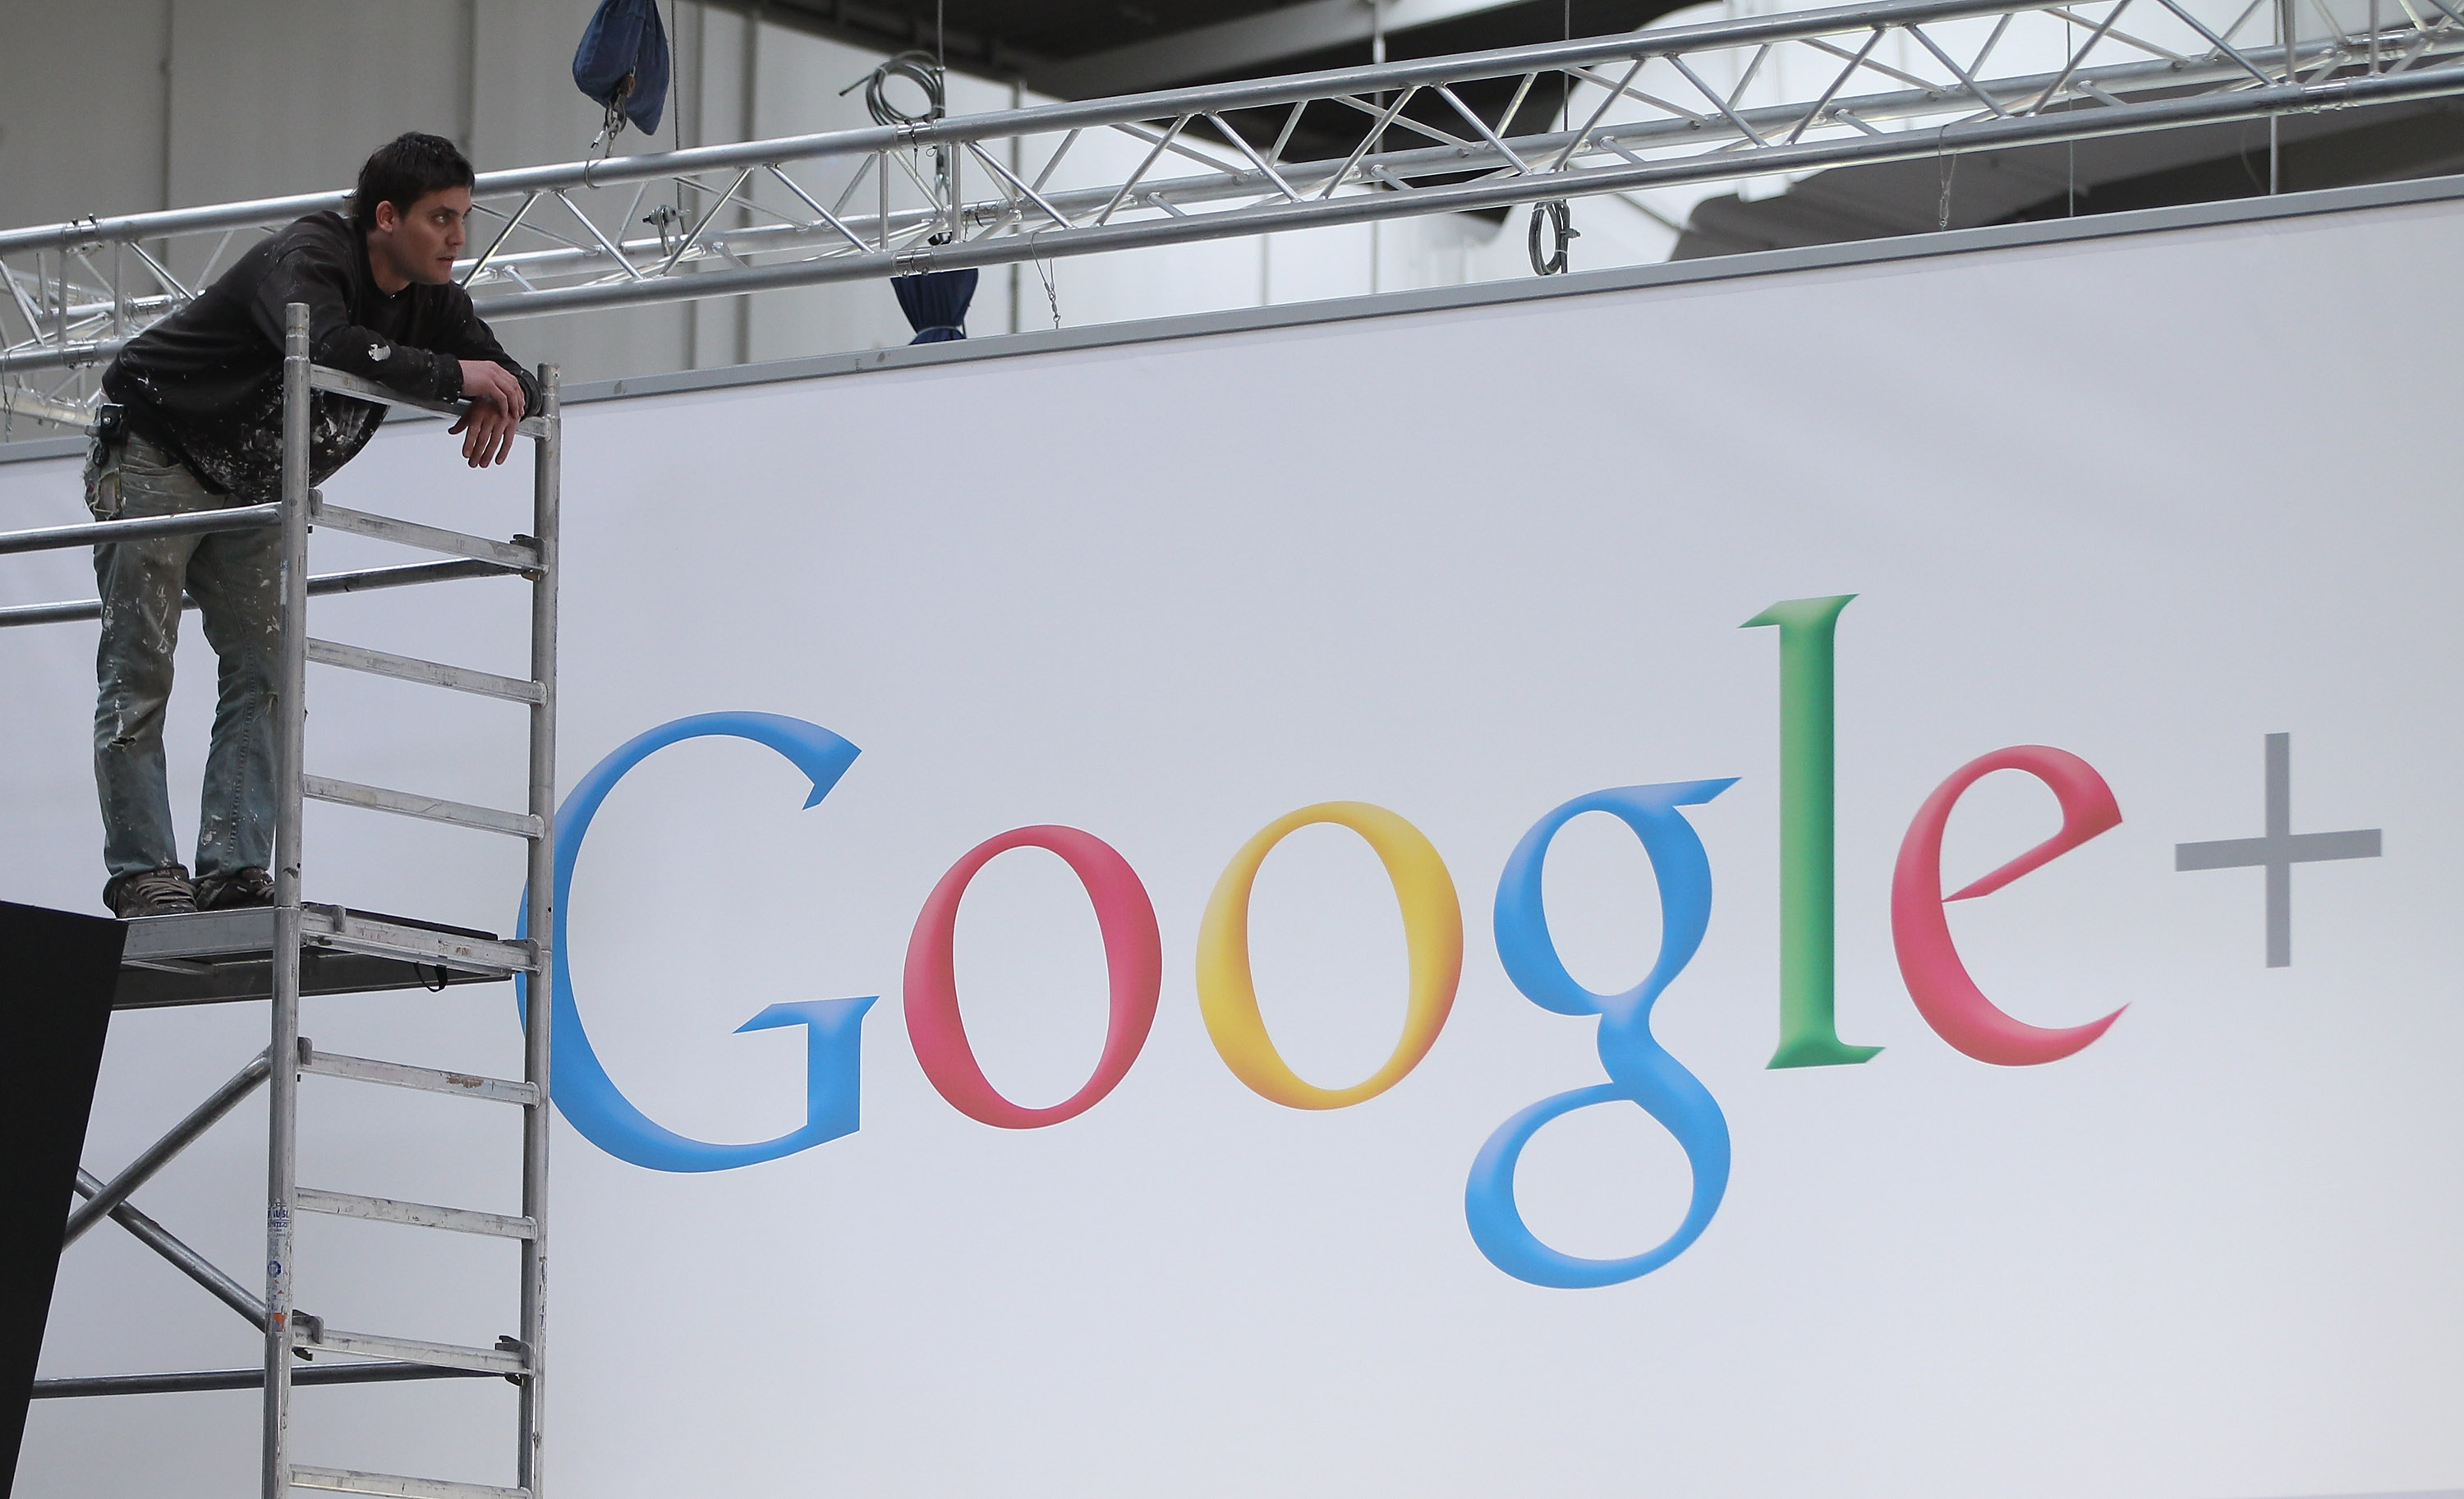 A worker prepares the Google stand the day before the CeBIT 2012 technology trade fair officially opens to the public on March 5, 2012 in Hanover, Germany. (Sean Gallup—Getty Images)